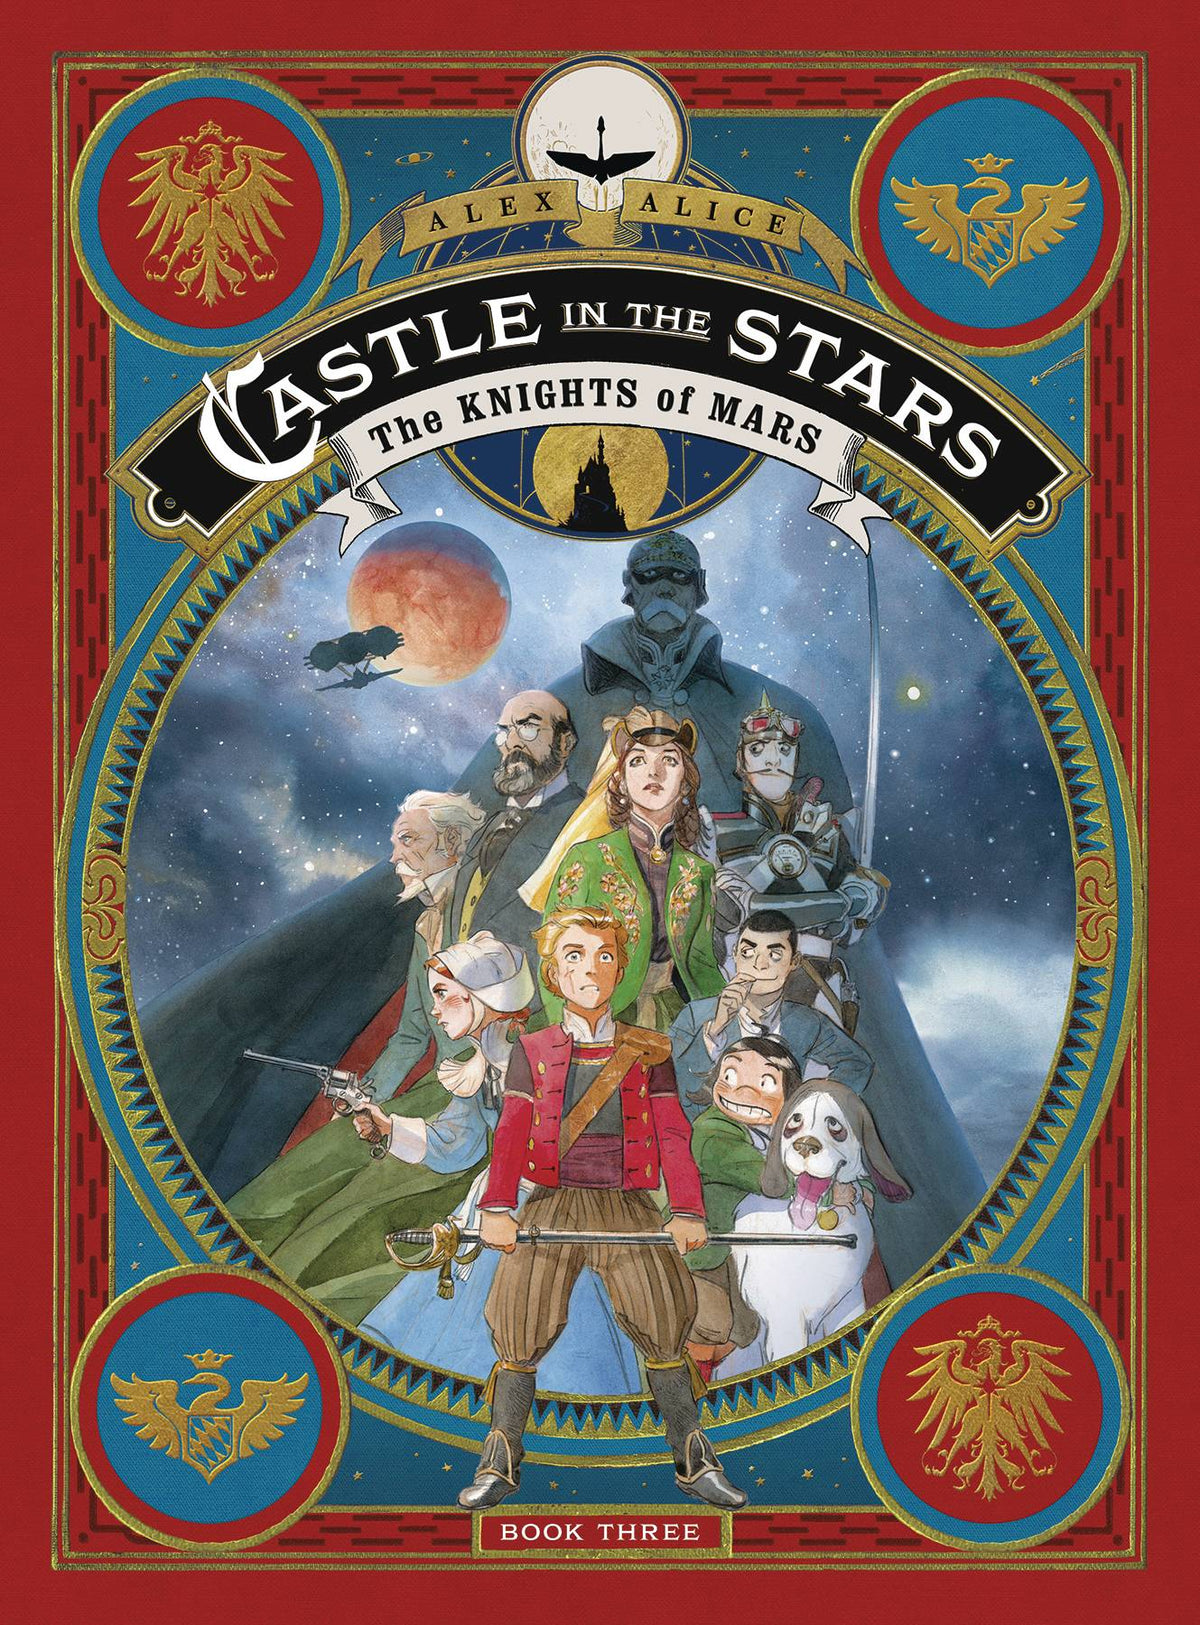 CASTLE IN THE STARS HC GN VOL 03 KNIGHTS OF MARS (C: 1-1-0) - Third Eye